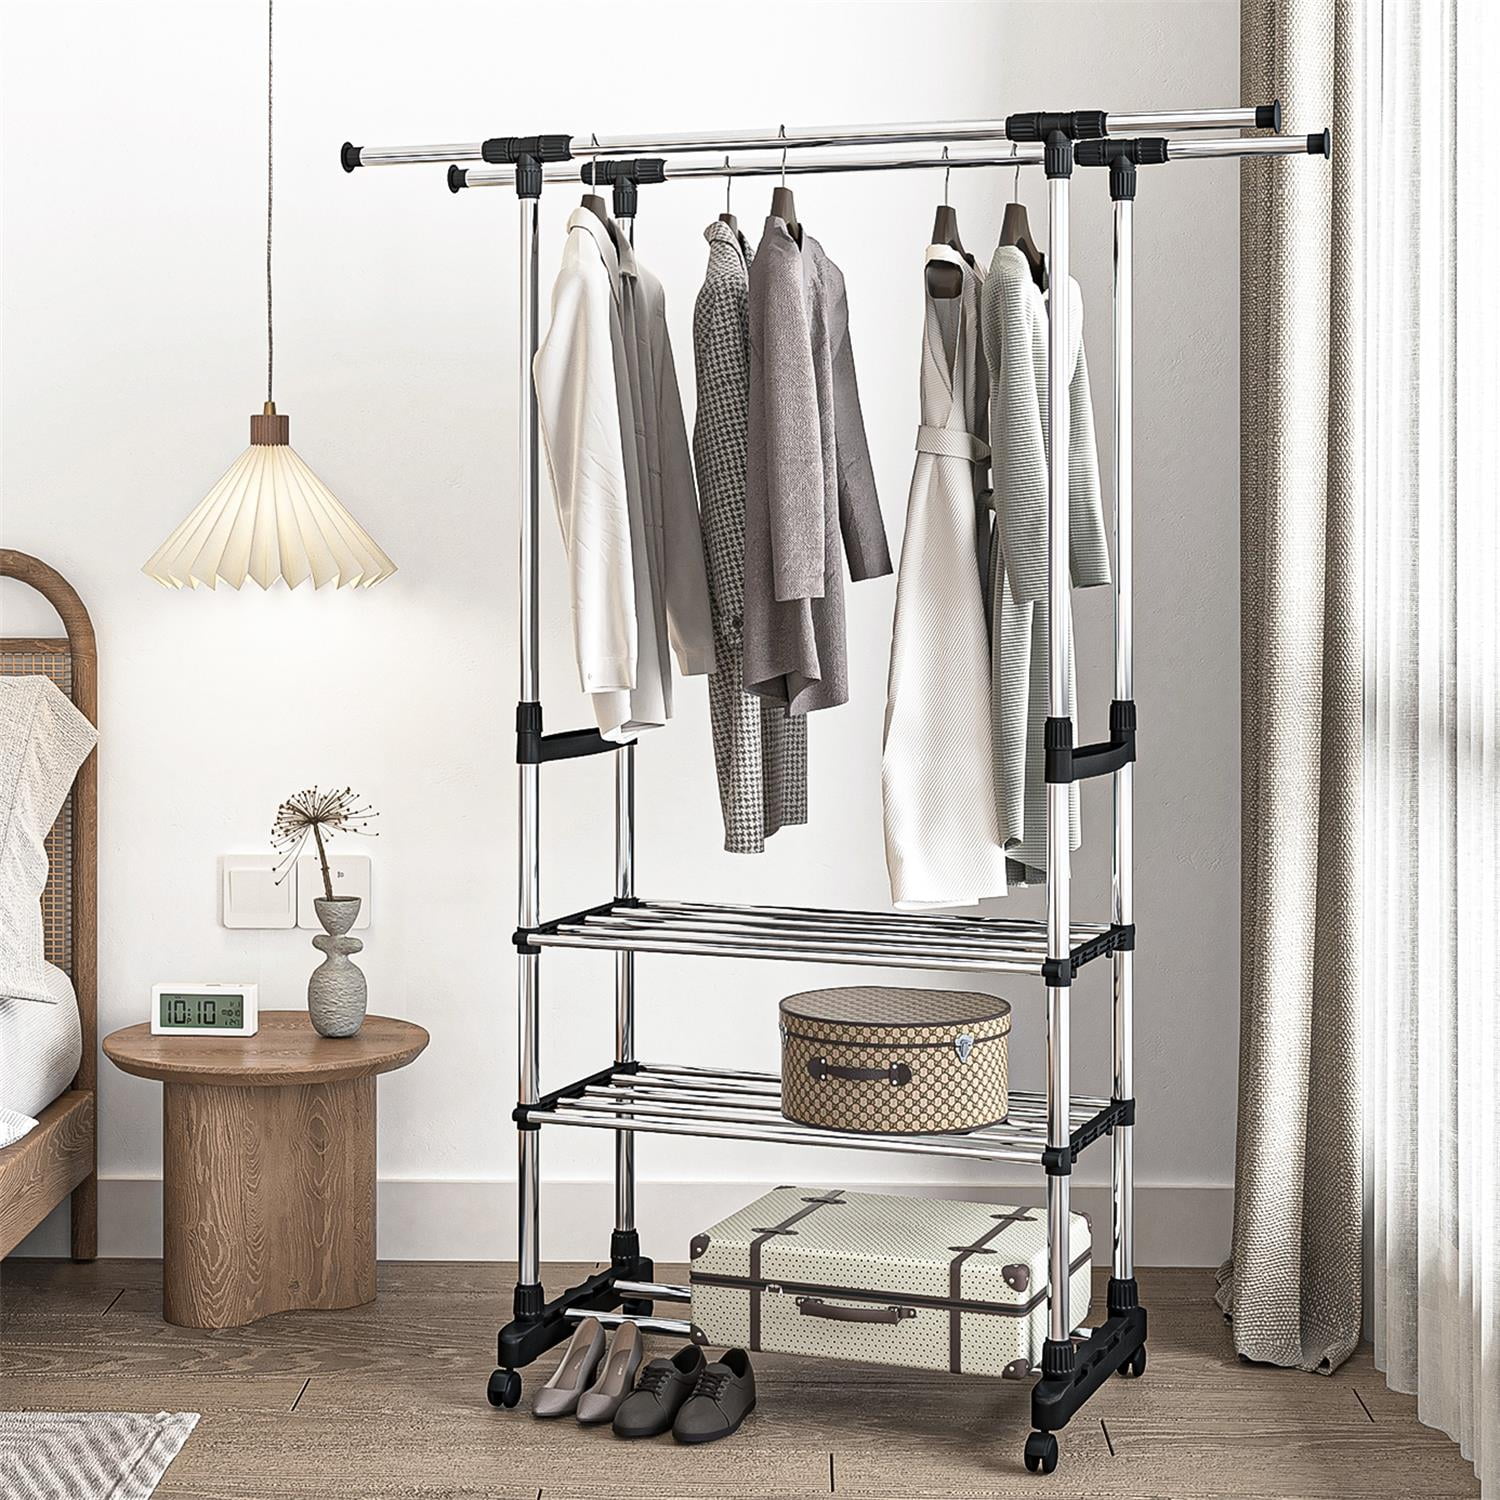 Anqidi 2 Tier Adjustable Clothing Rack, Floor to Ceiling Clothes Hanger  Closet System Free-Standing Telescopic Garment Stand Black 